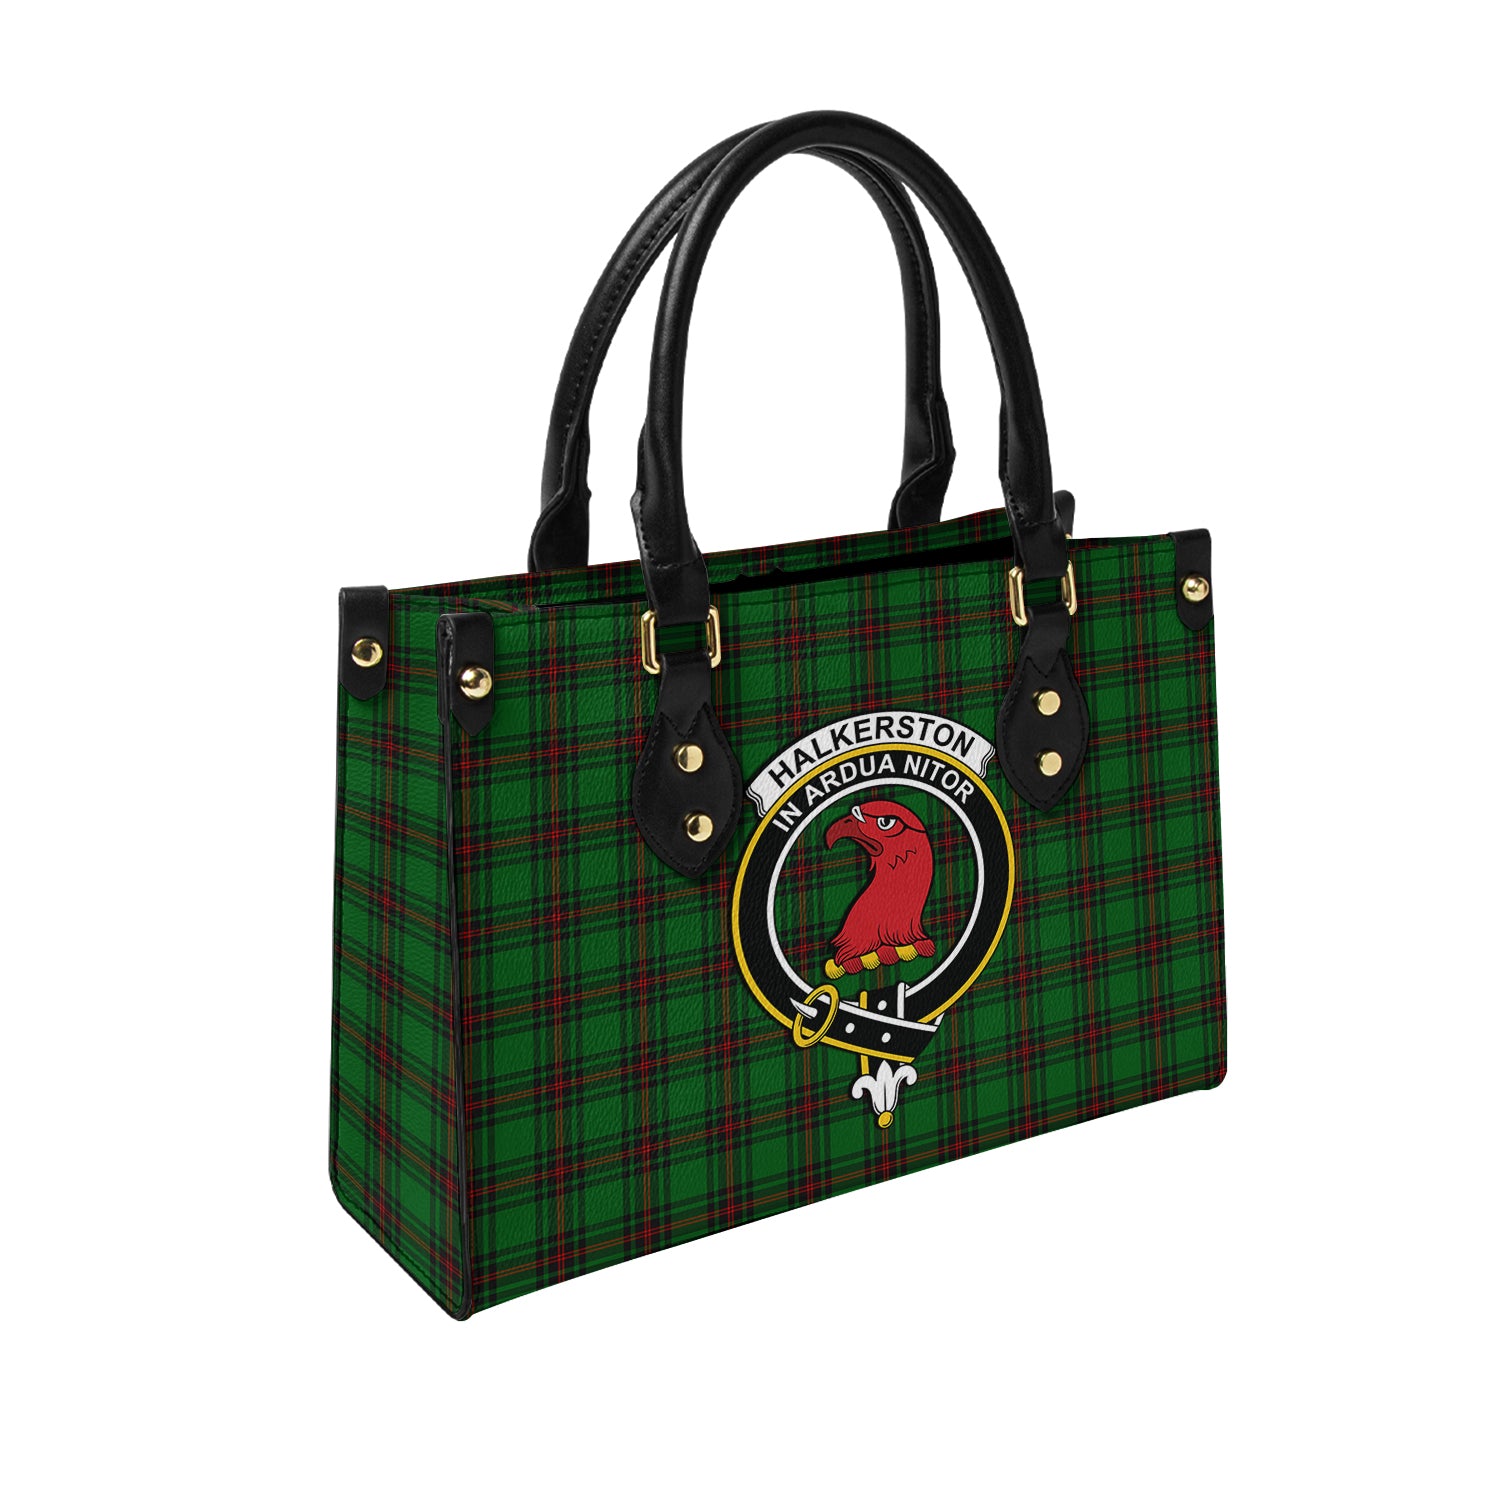 halkerston-tartan-leather-bag-with-family-crest